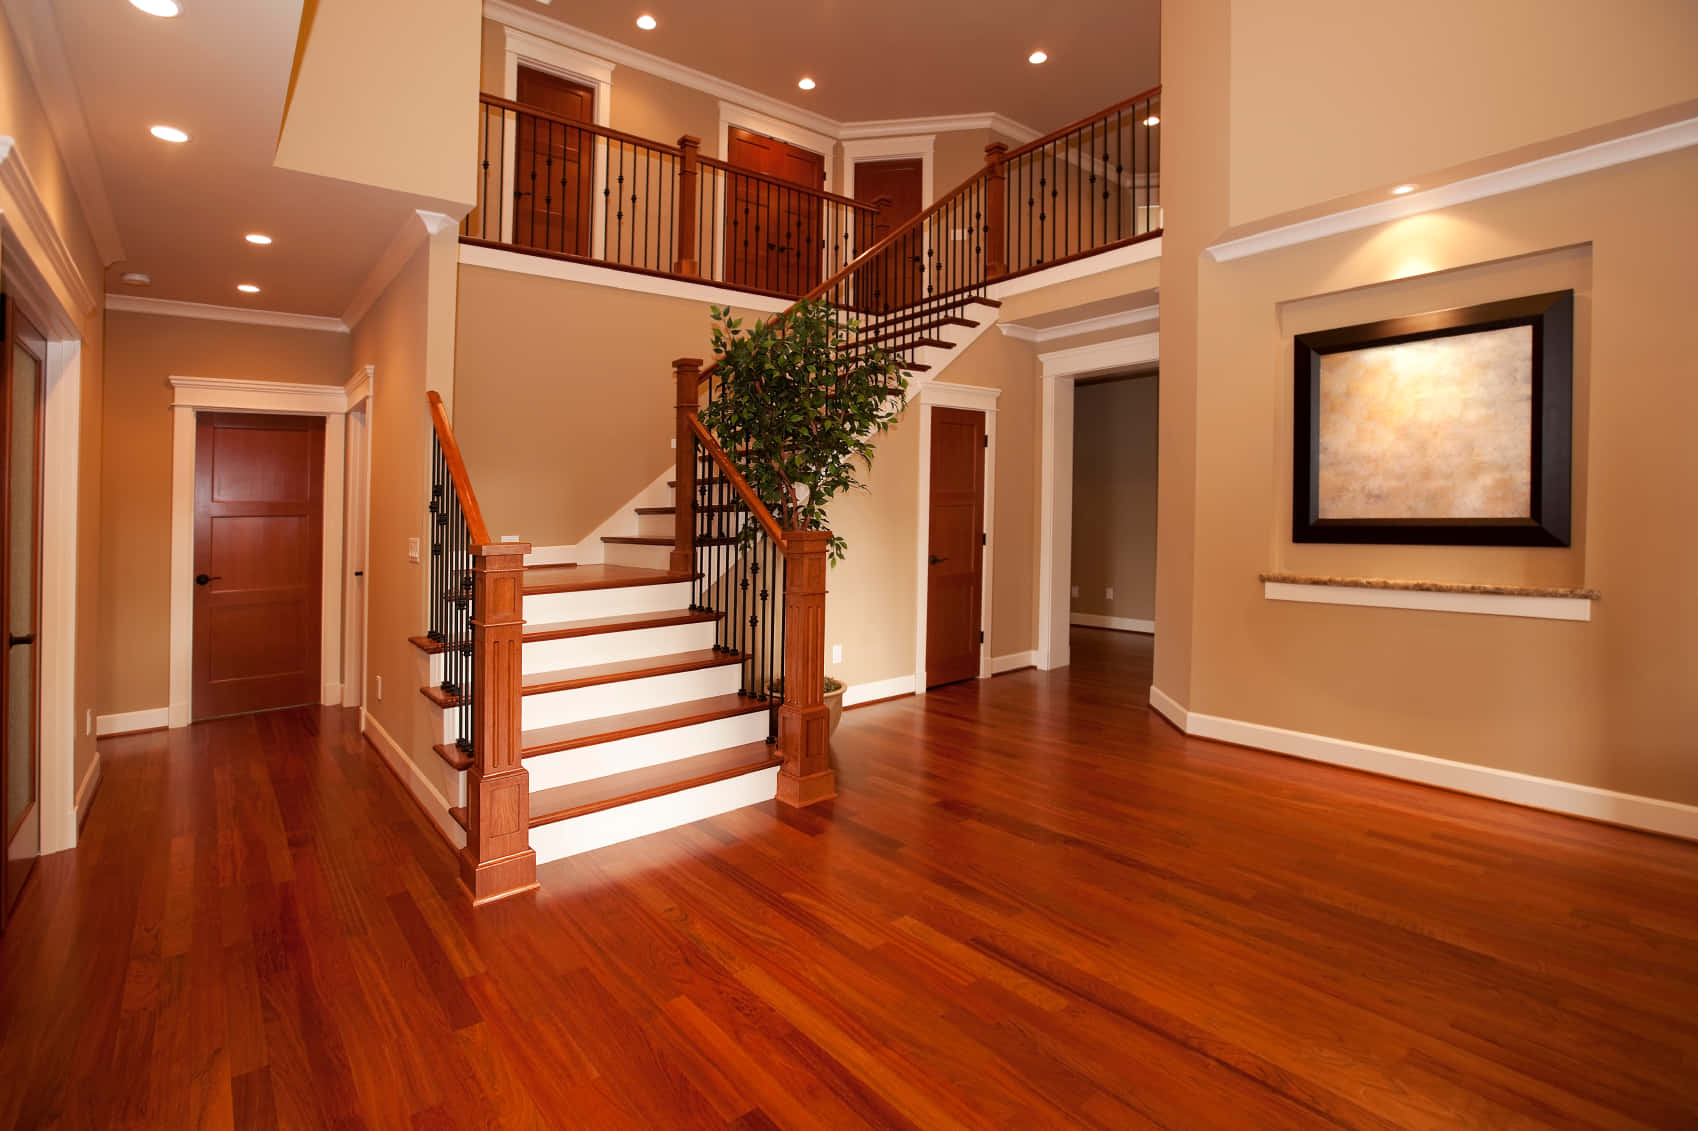 A Home With Hardwood Floors And Stairs